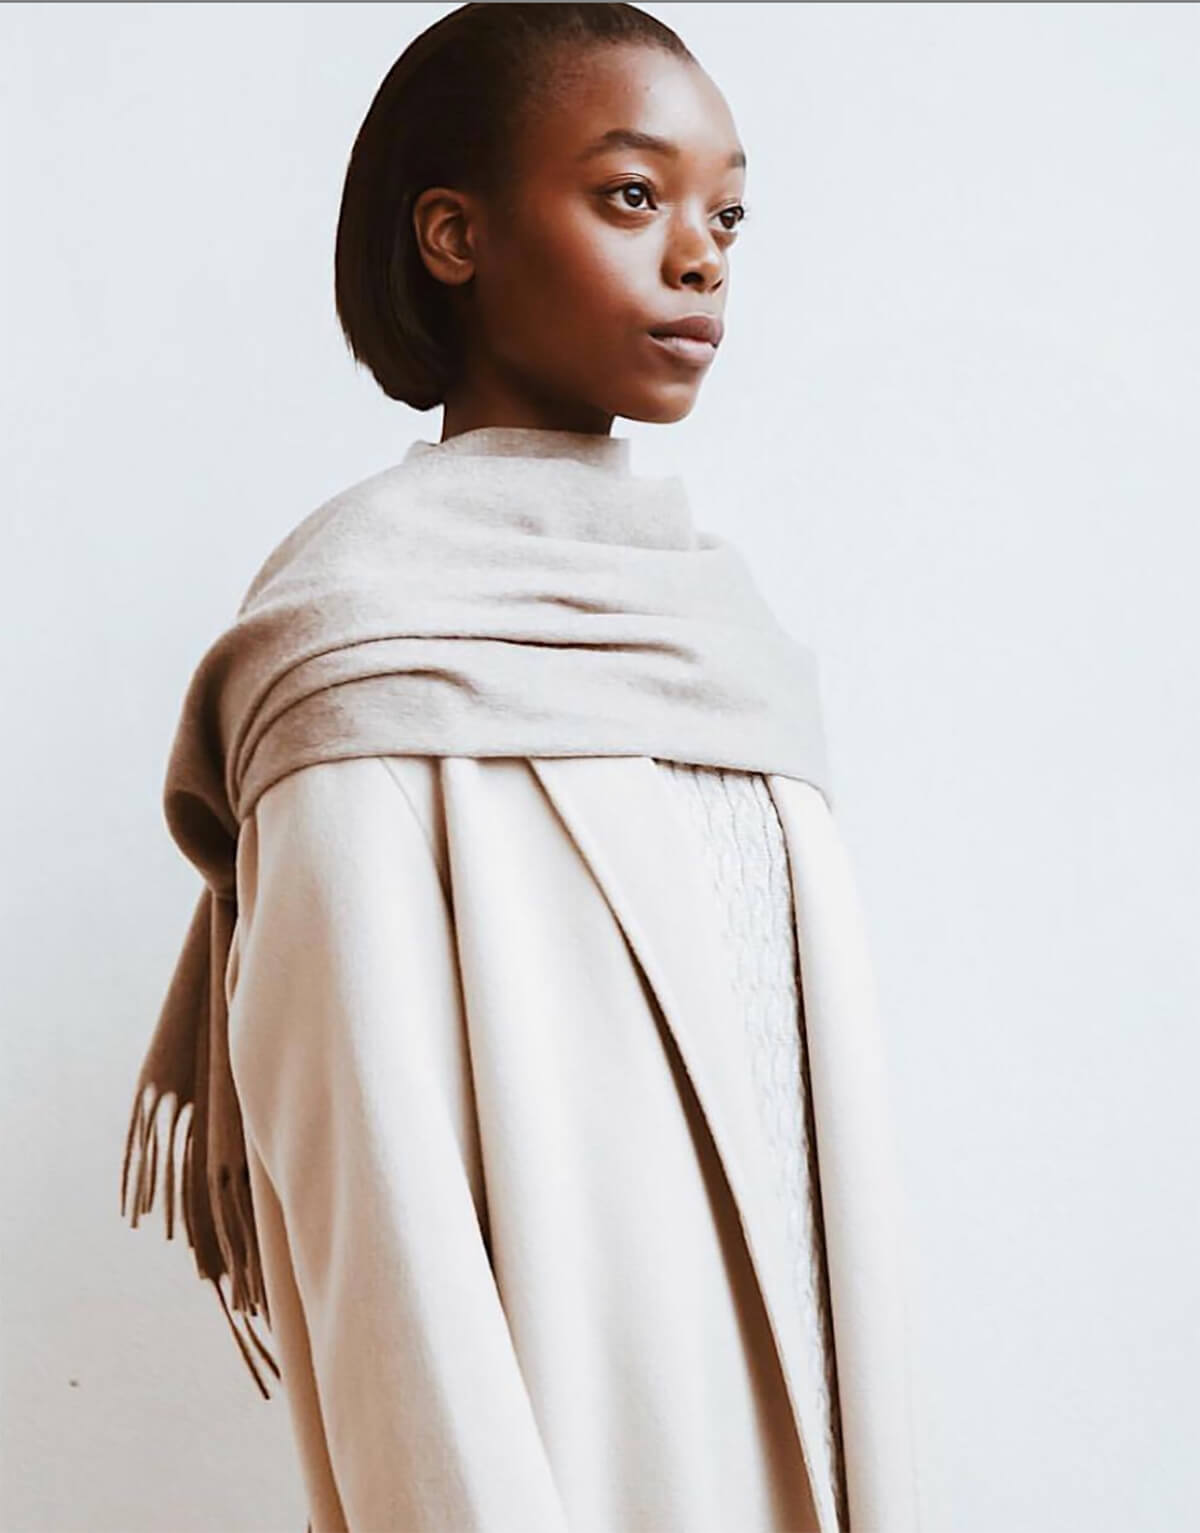 Female model poses in white scarf and coat looking into the distance